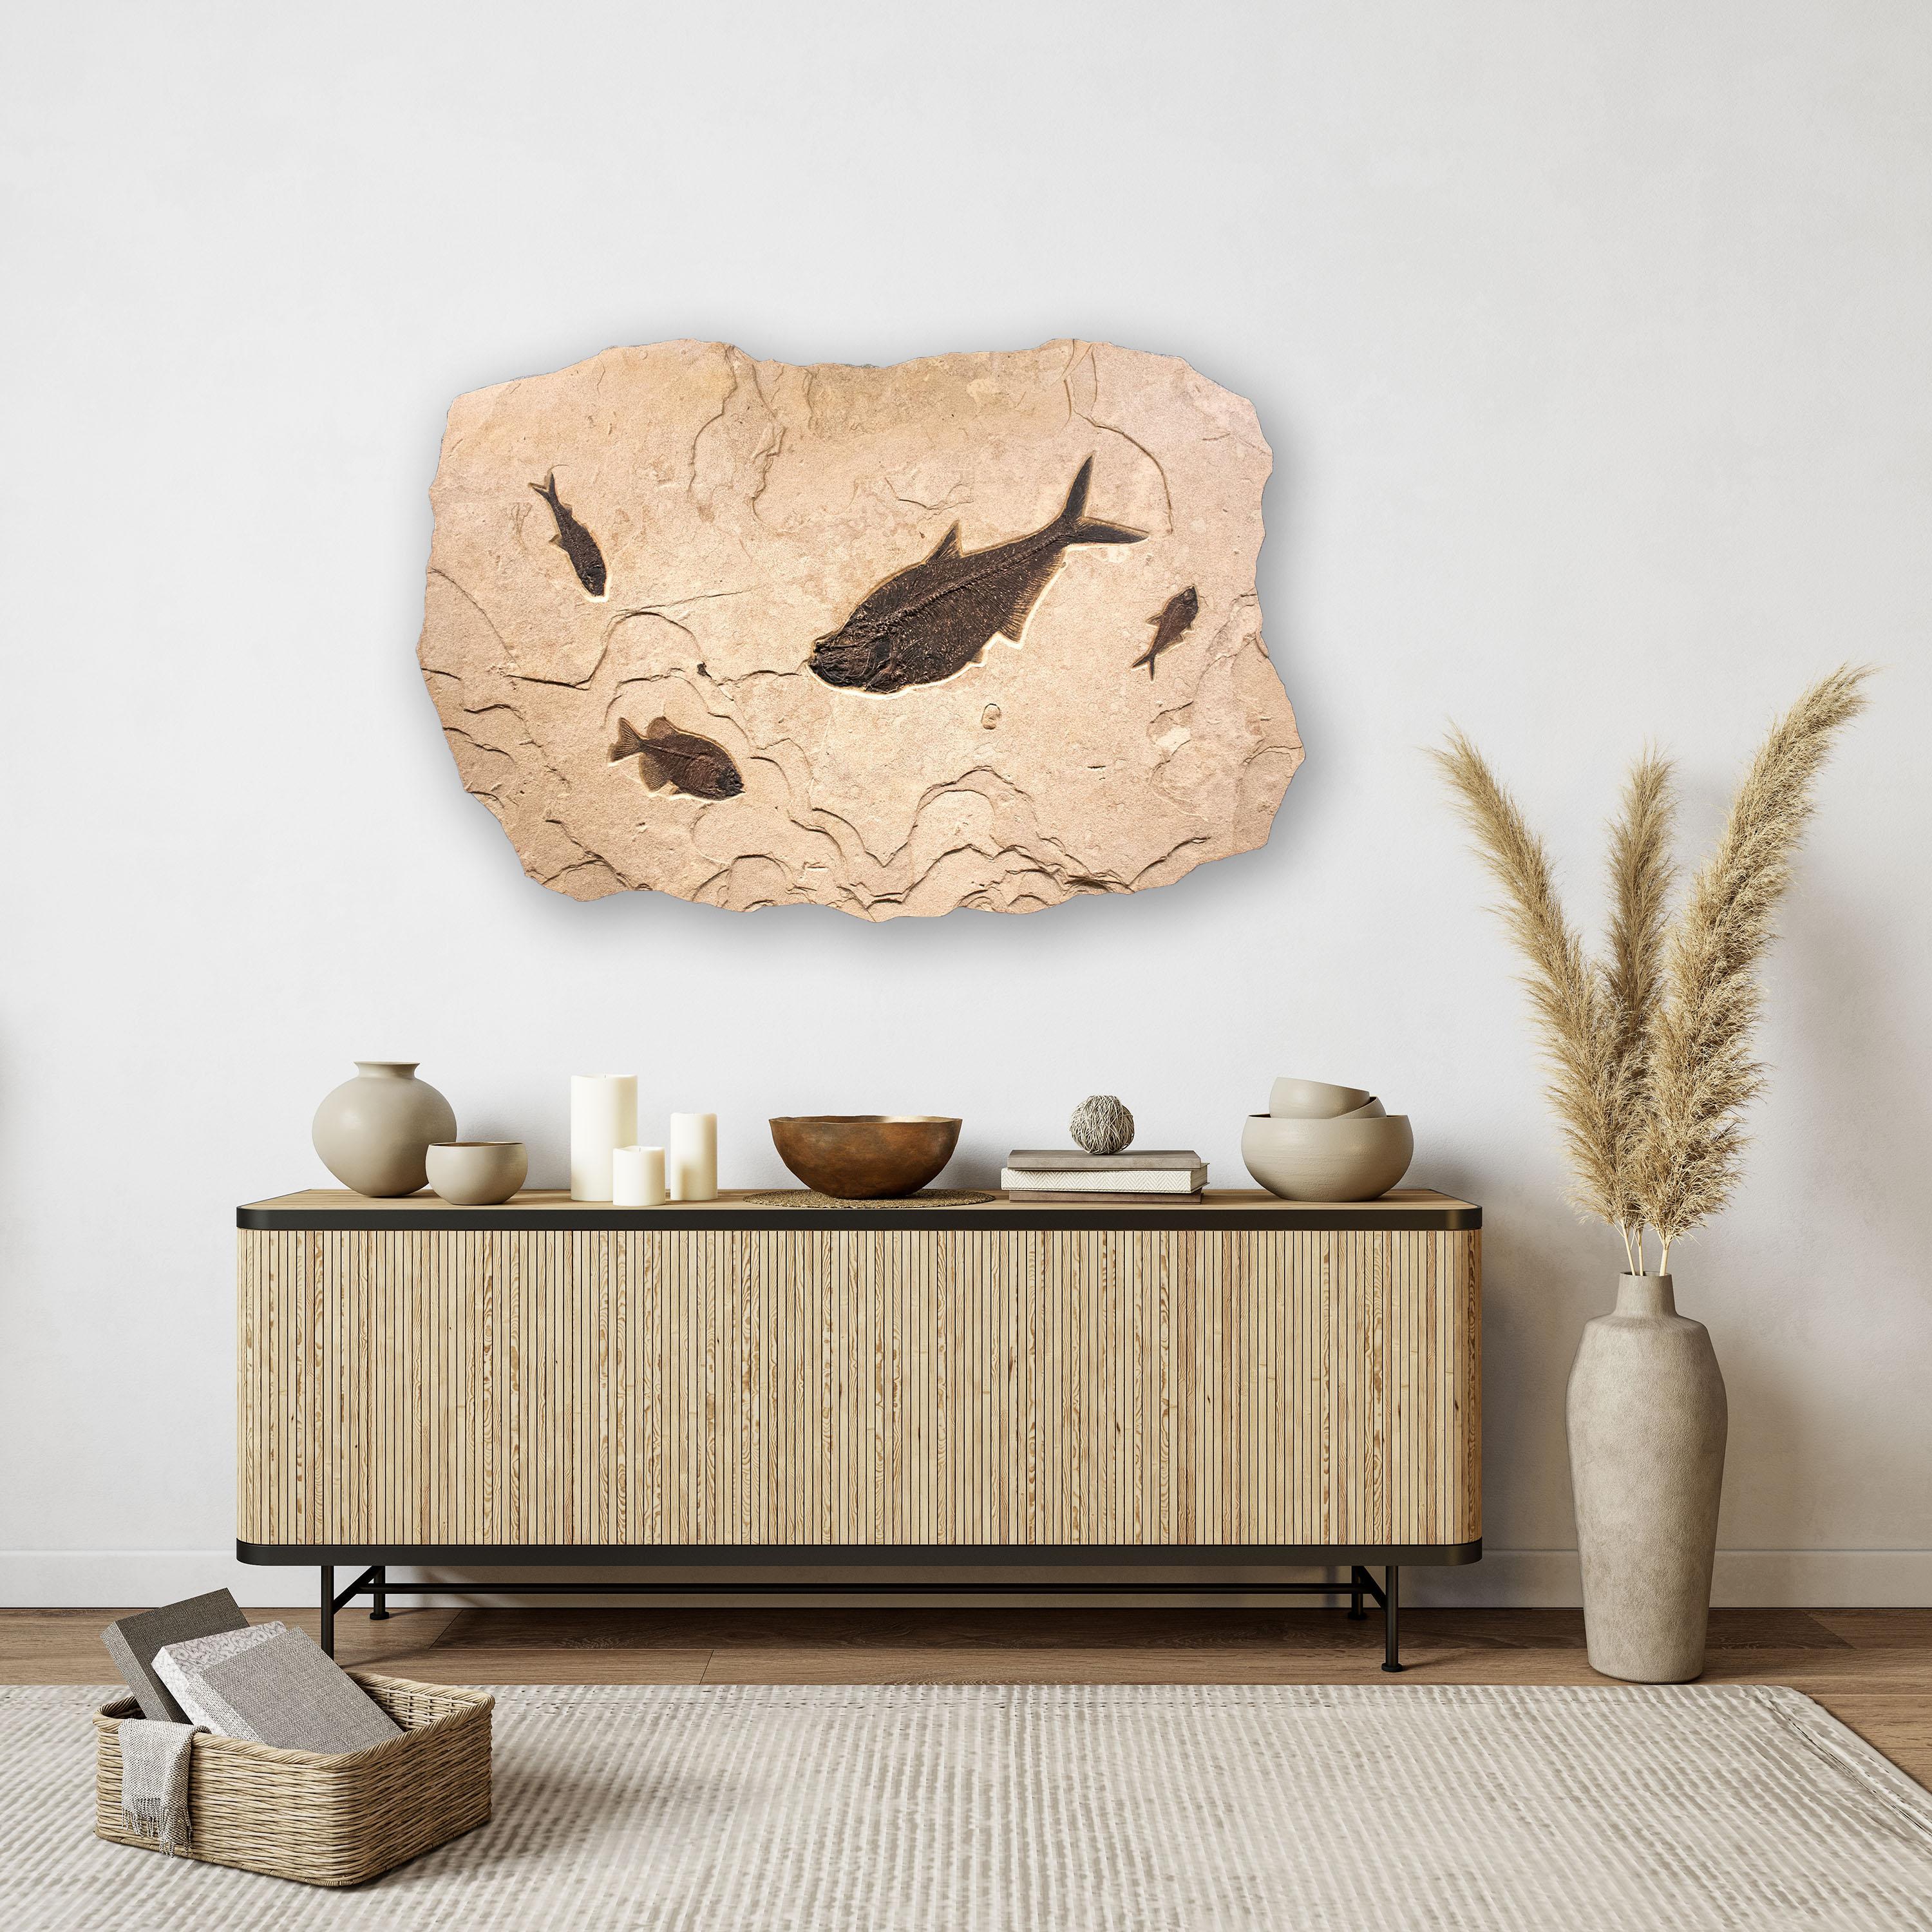 This sculptural fossil mural features two Diplomystus dentatus, a Phareodus testis, and a Knightia eocaena; these fish are all Eocene era fossils dating back about 50 million years. These ancient fish are forever preserved in a textured matrix of